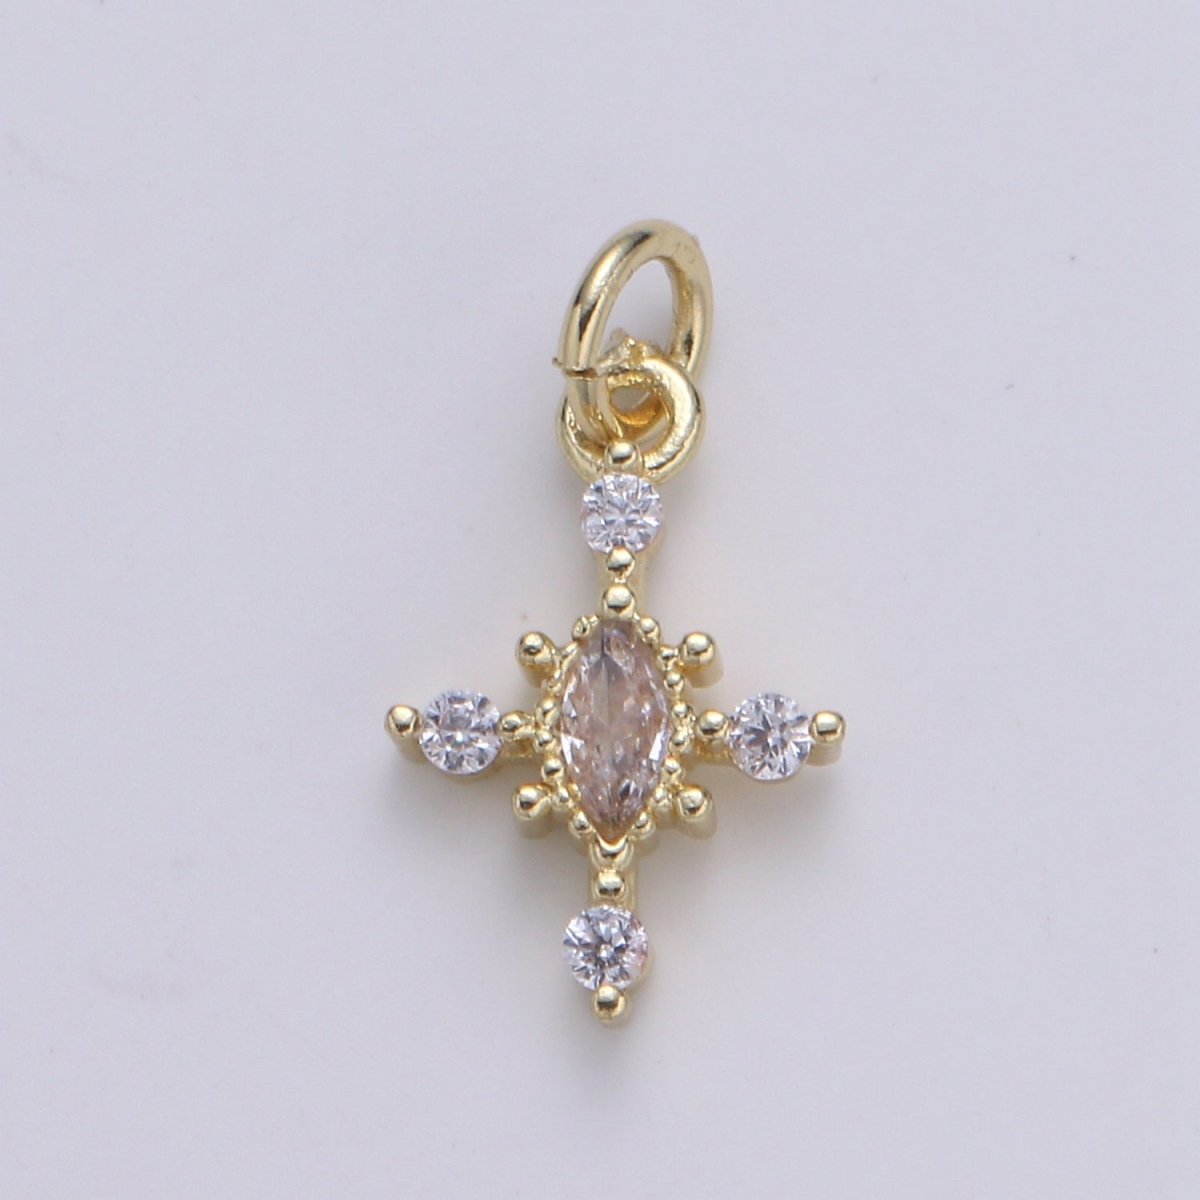 Mini Cross Charm Micro Pave Eye 24K Gold Filled Cross Charm, Cubic Zirconia Cluster Charm for Necklace Earring Bracelet Jewelry Making E-233-E-236 - DLUXCA